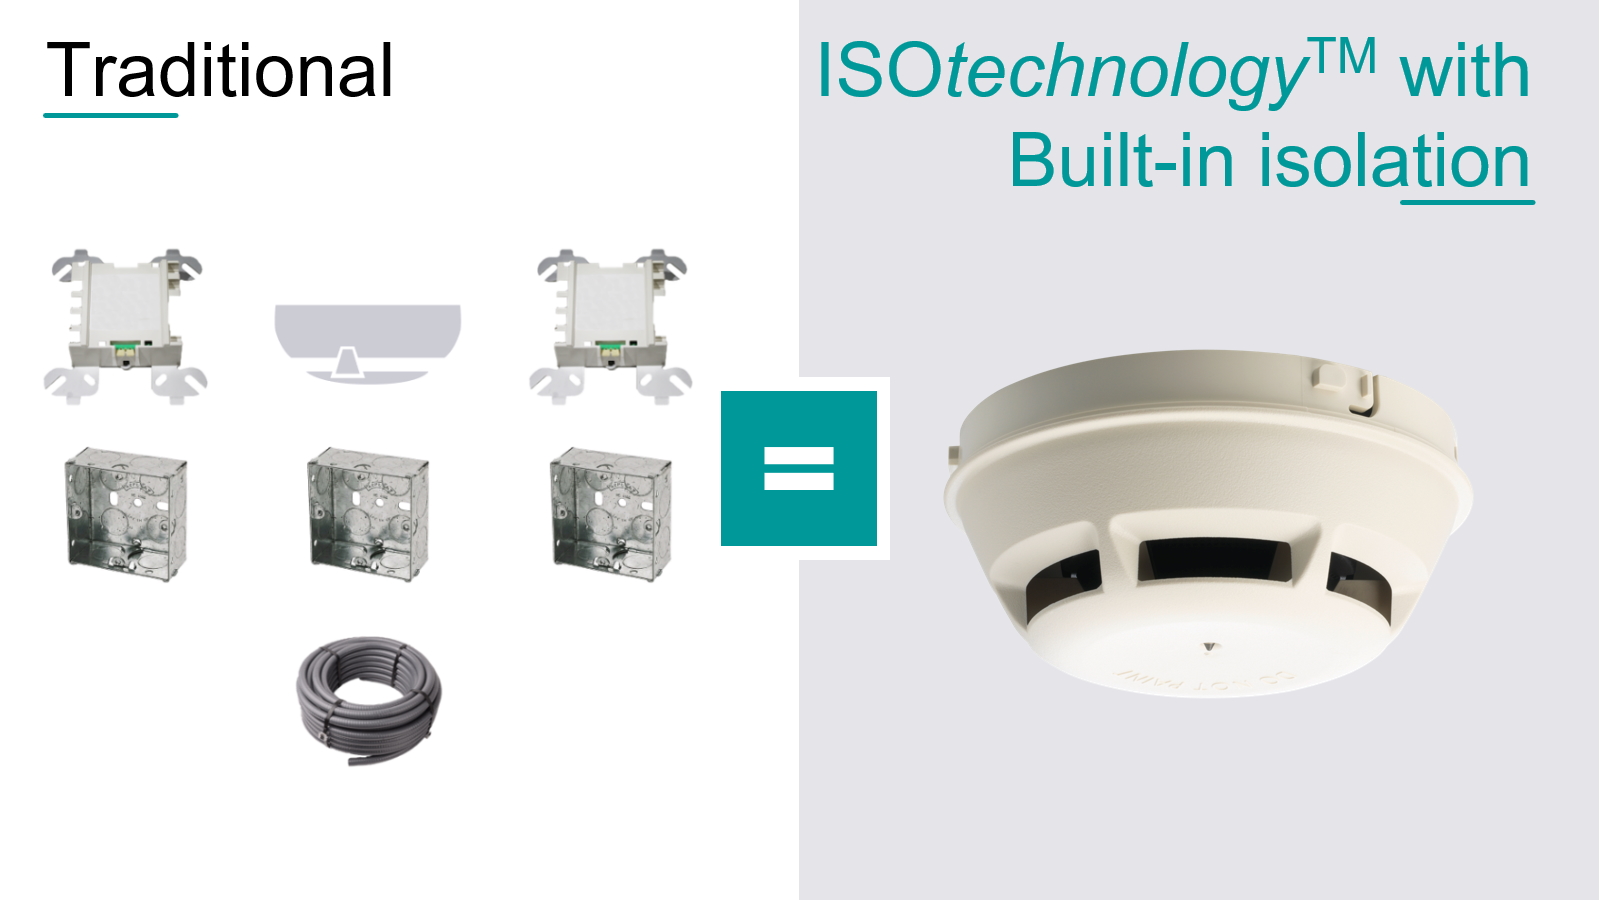 Traditional vs ISOtechnology components